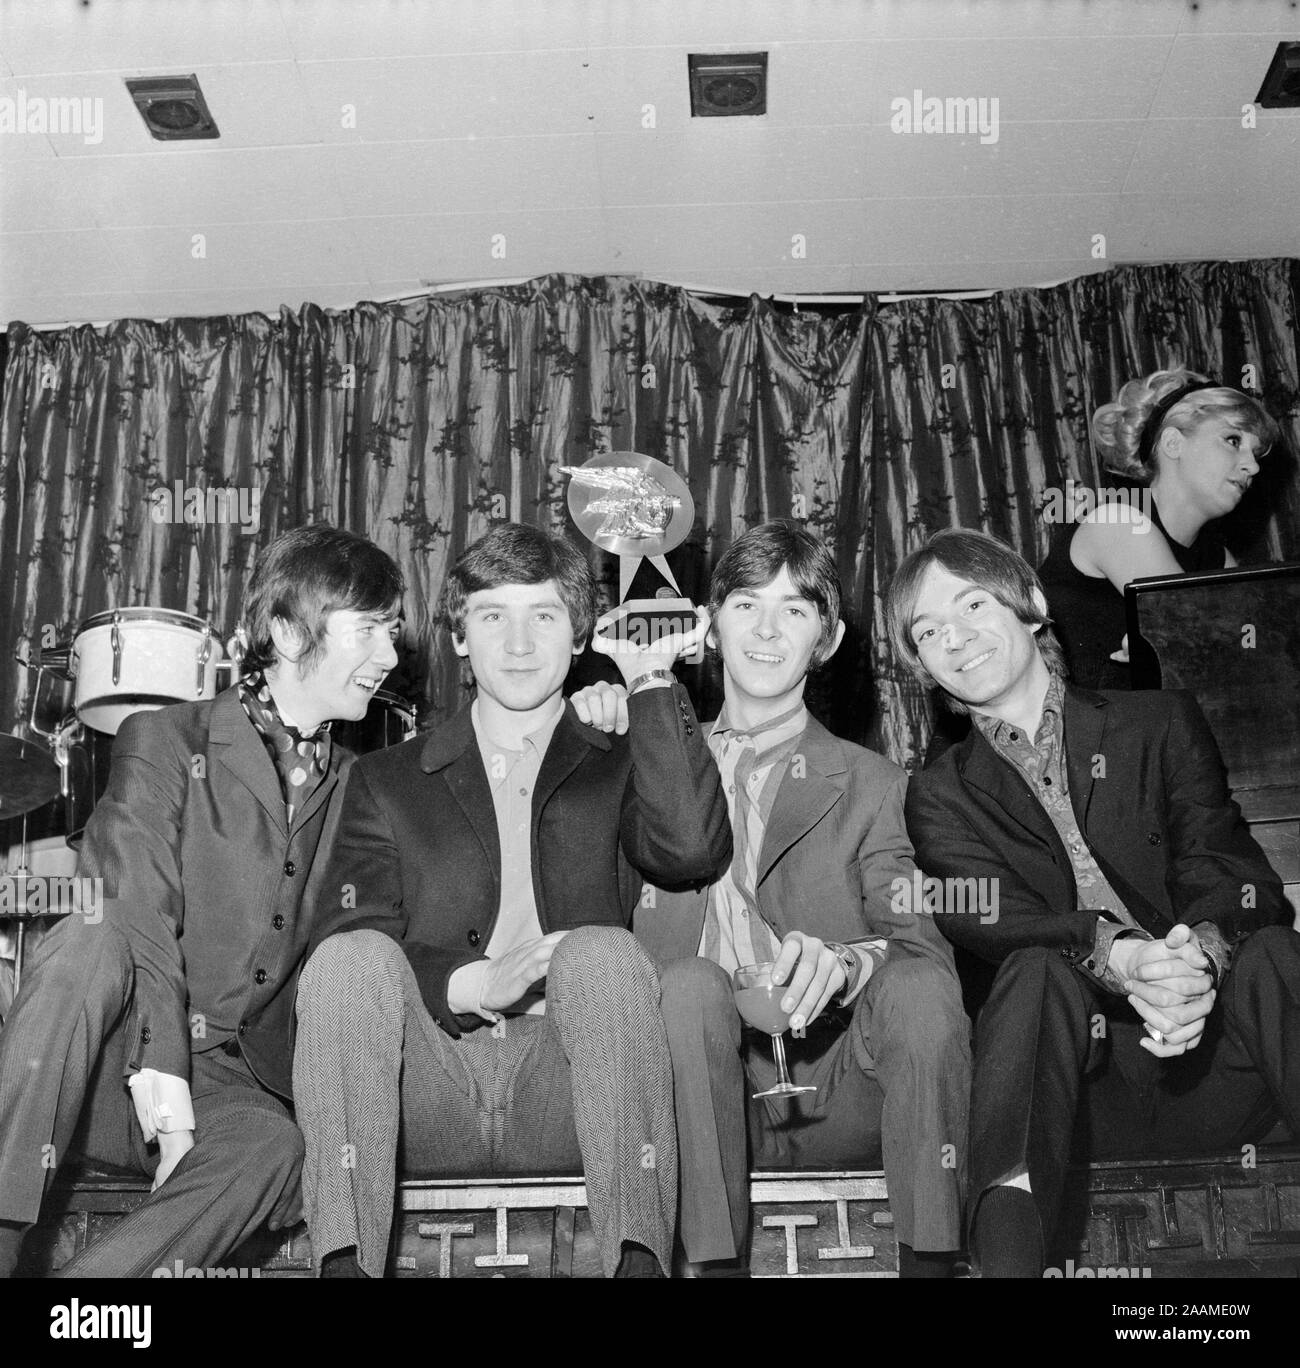 2nd February 1967. The English Pop group The Small Faces collecting an award. Members include Steve Marriott, Ronnie Lane, Kenney Jones, and Ian McLagan. Stock Photo